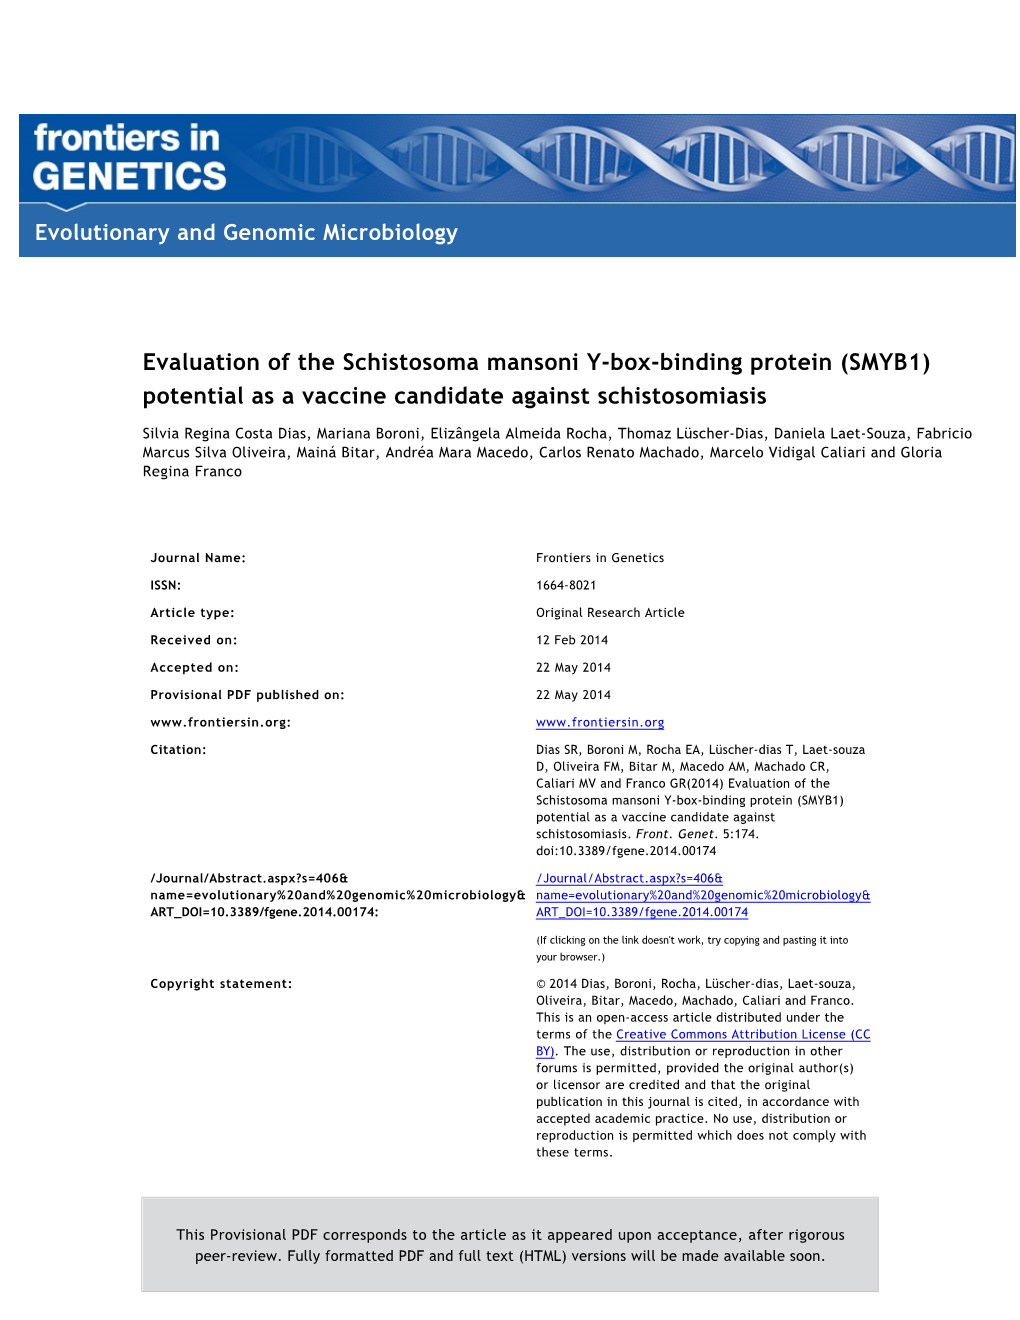 Potential As a Vaccine Candidate Against Schistosomiasis